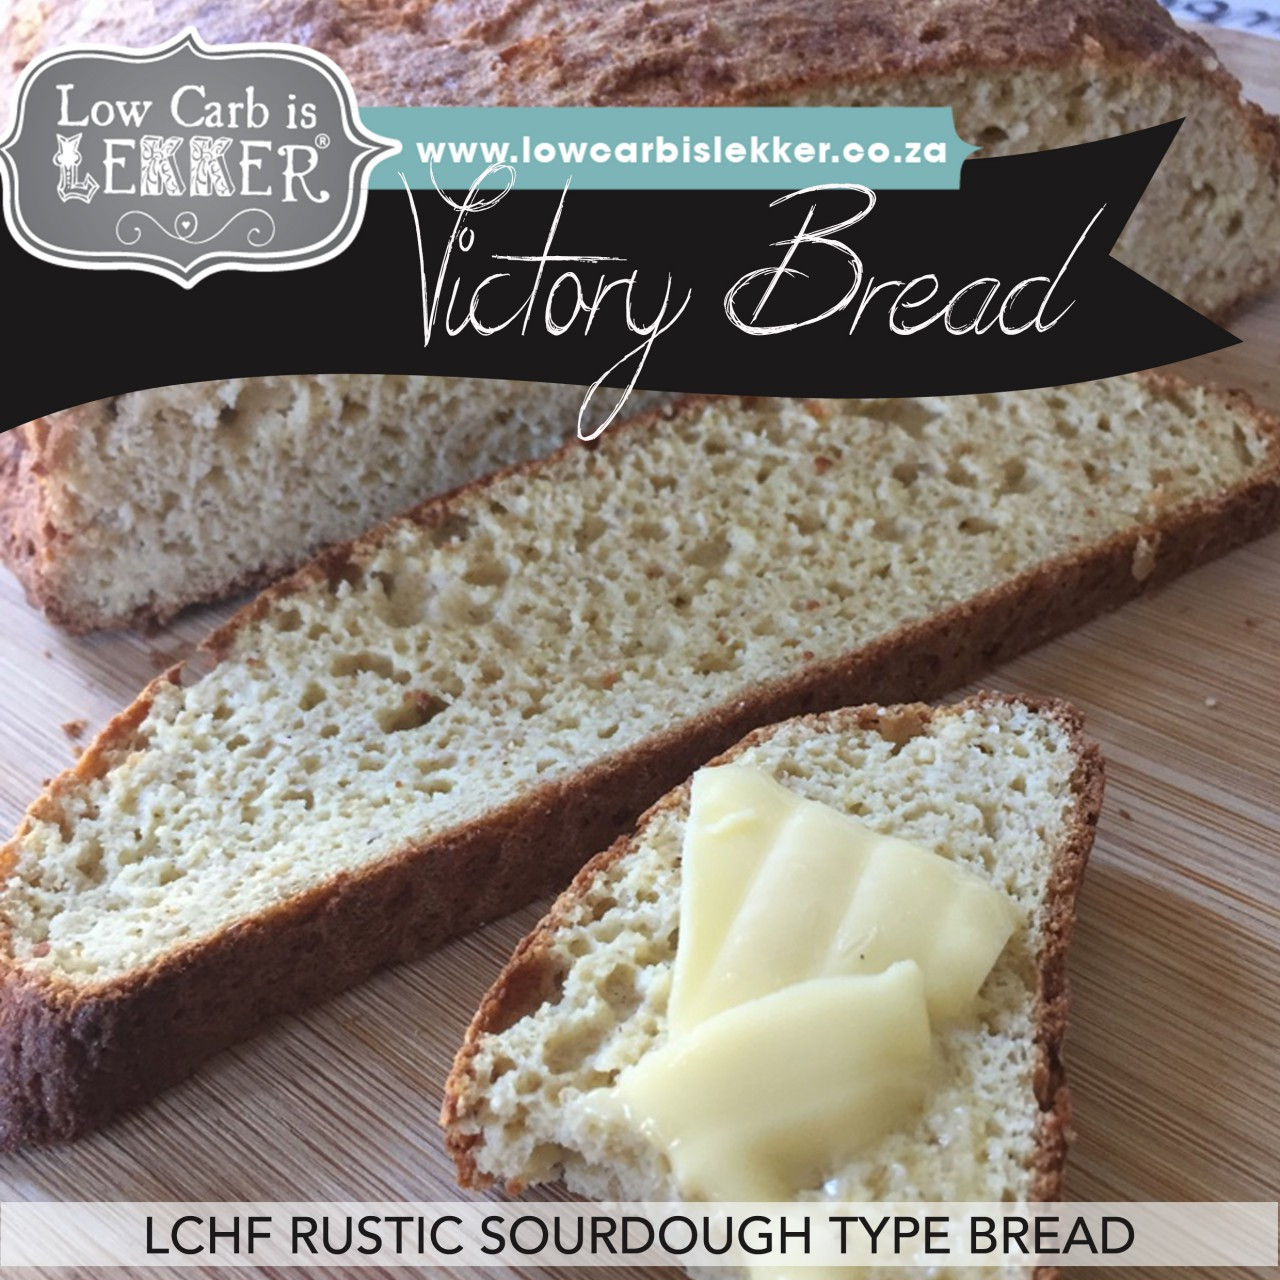 Low Carb Sourdough Bread
 Victory bread Sourdough type LCHF bread Low Carb is